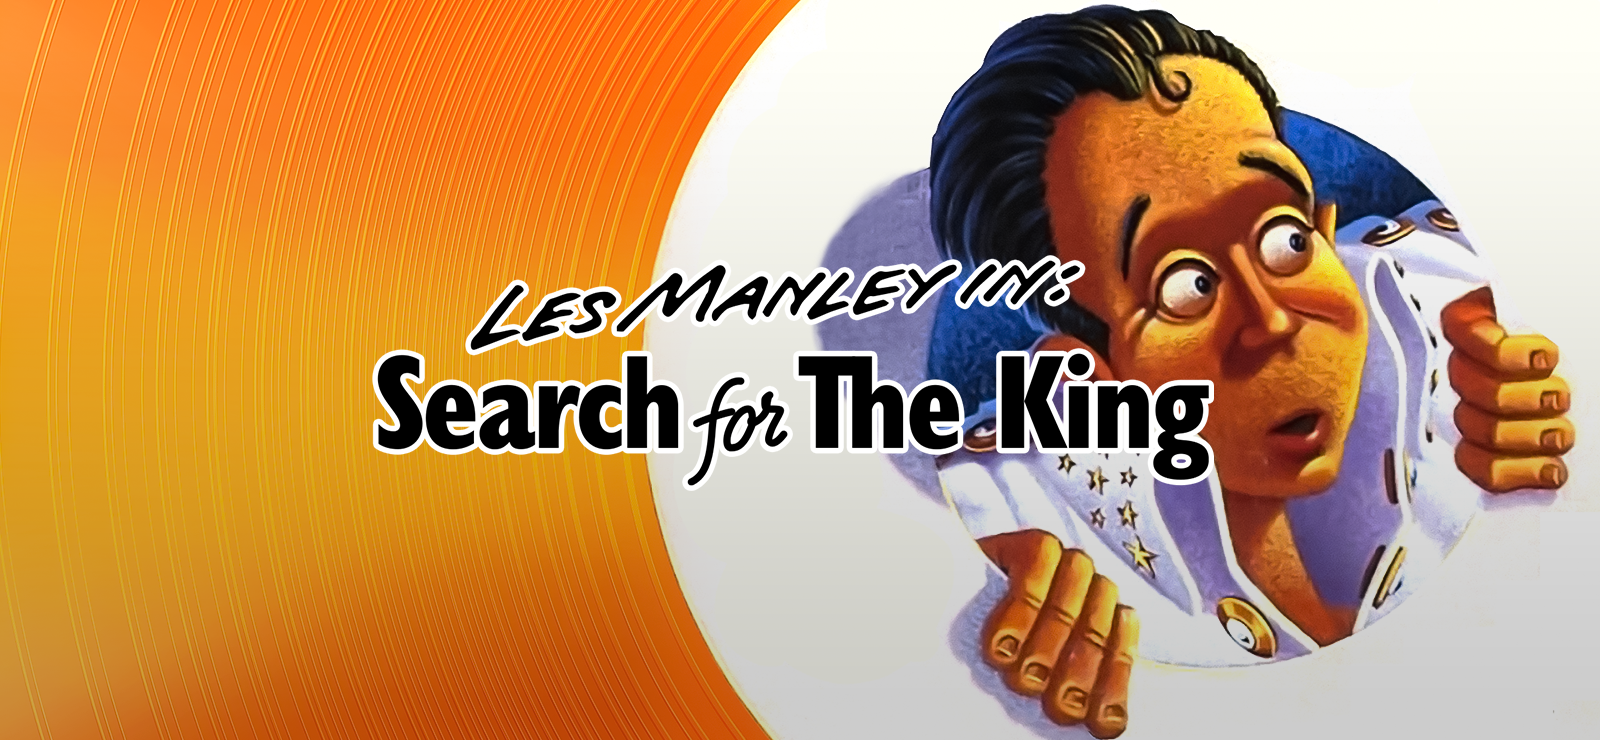 Les Manley In: Search For The King